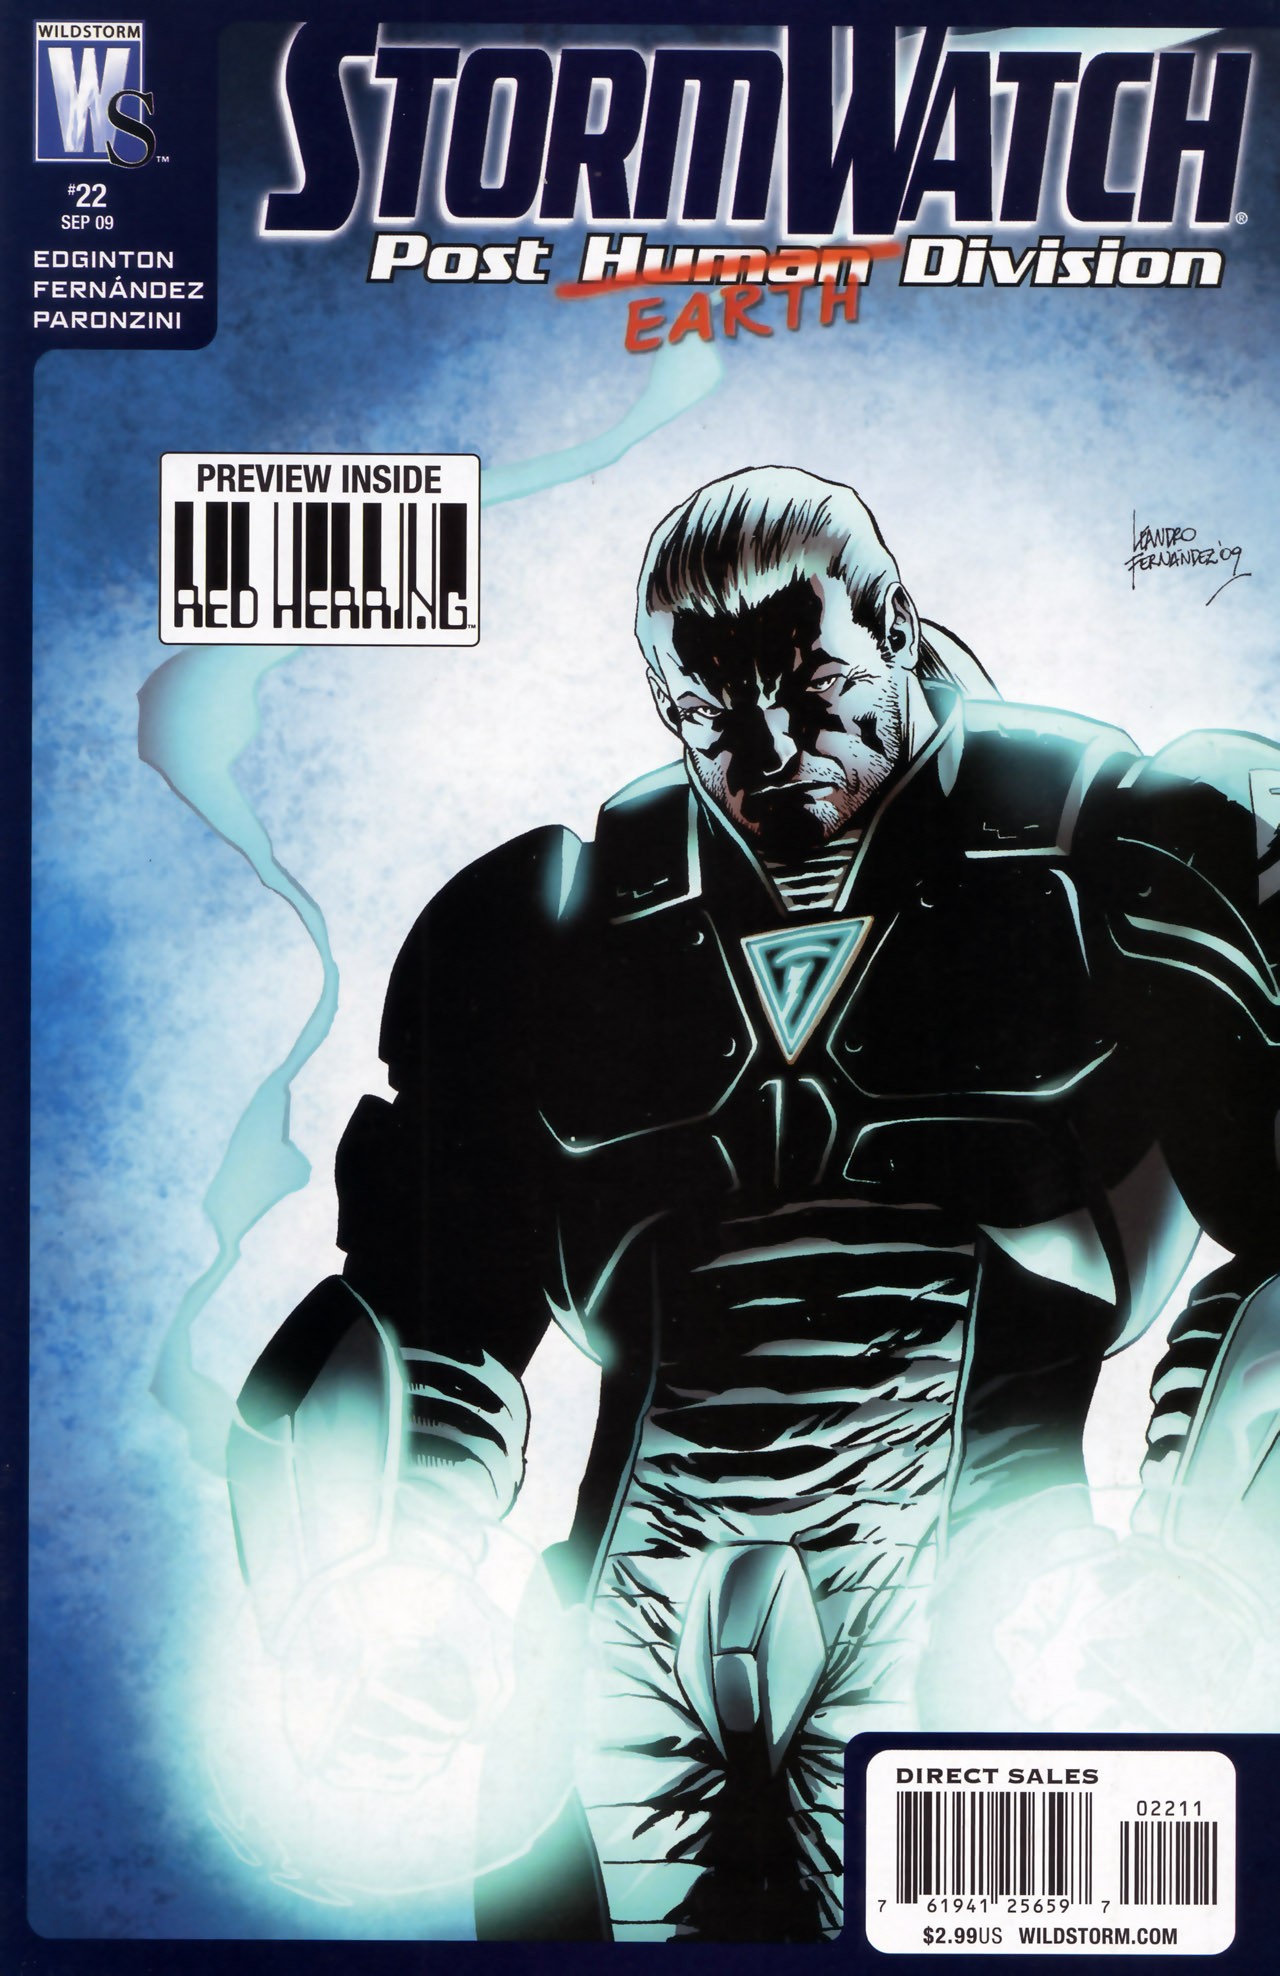 Stormwatch: Post Human Division Vol. 1 #22